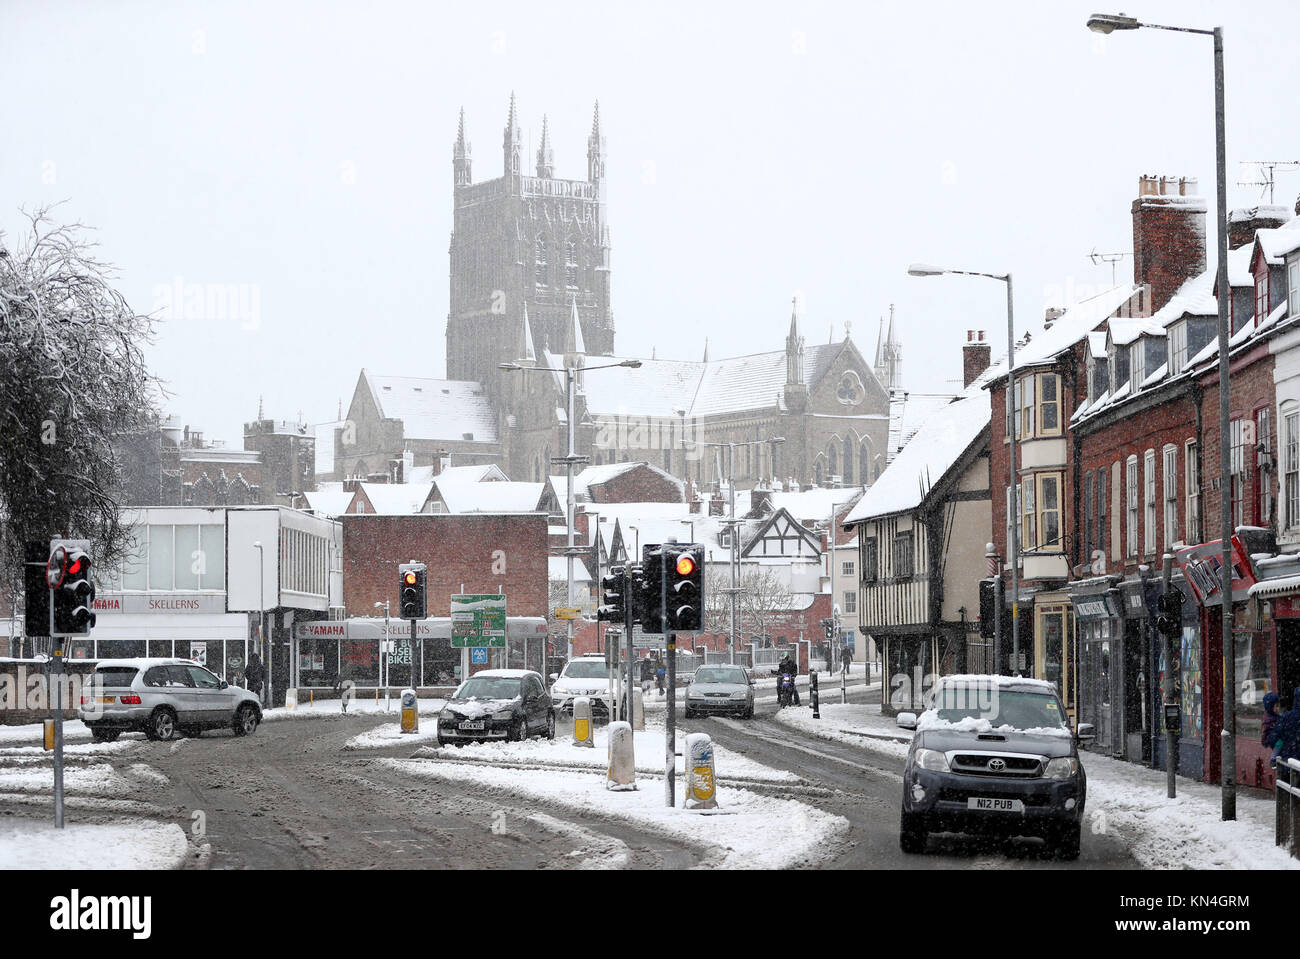 Motorists brave the snow in Worcester, as heavy snowfall across parts of the UK is causing widespread disruption, closing roads and grounding flights at an airport. Stock Photo